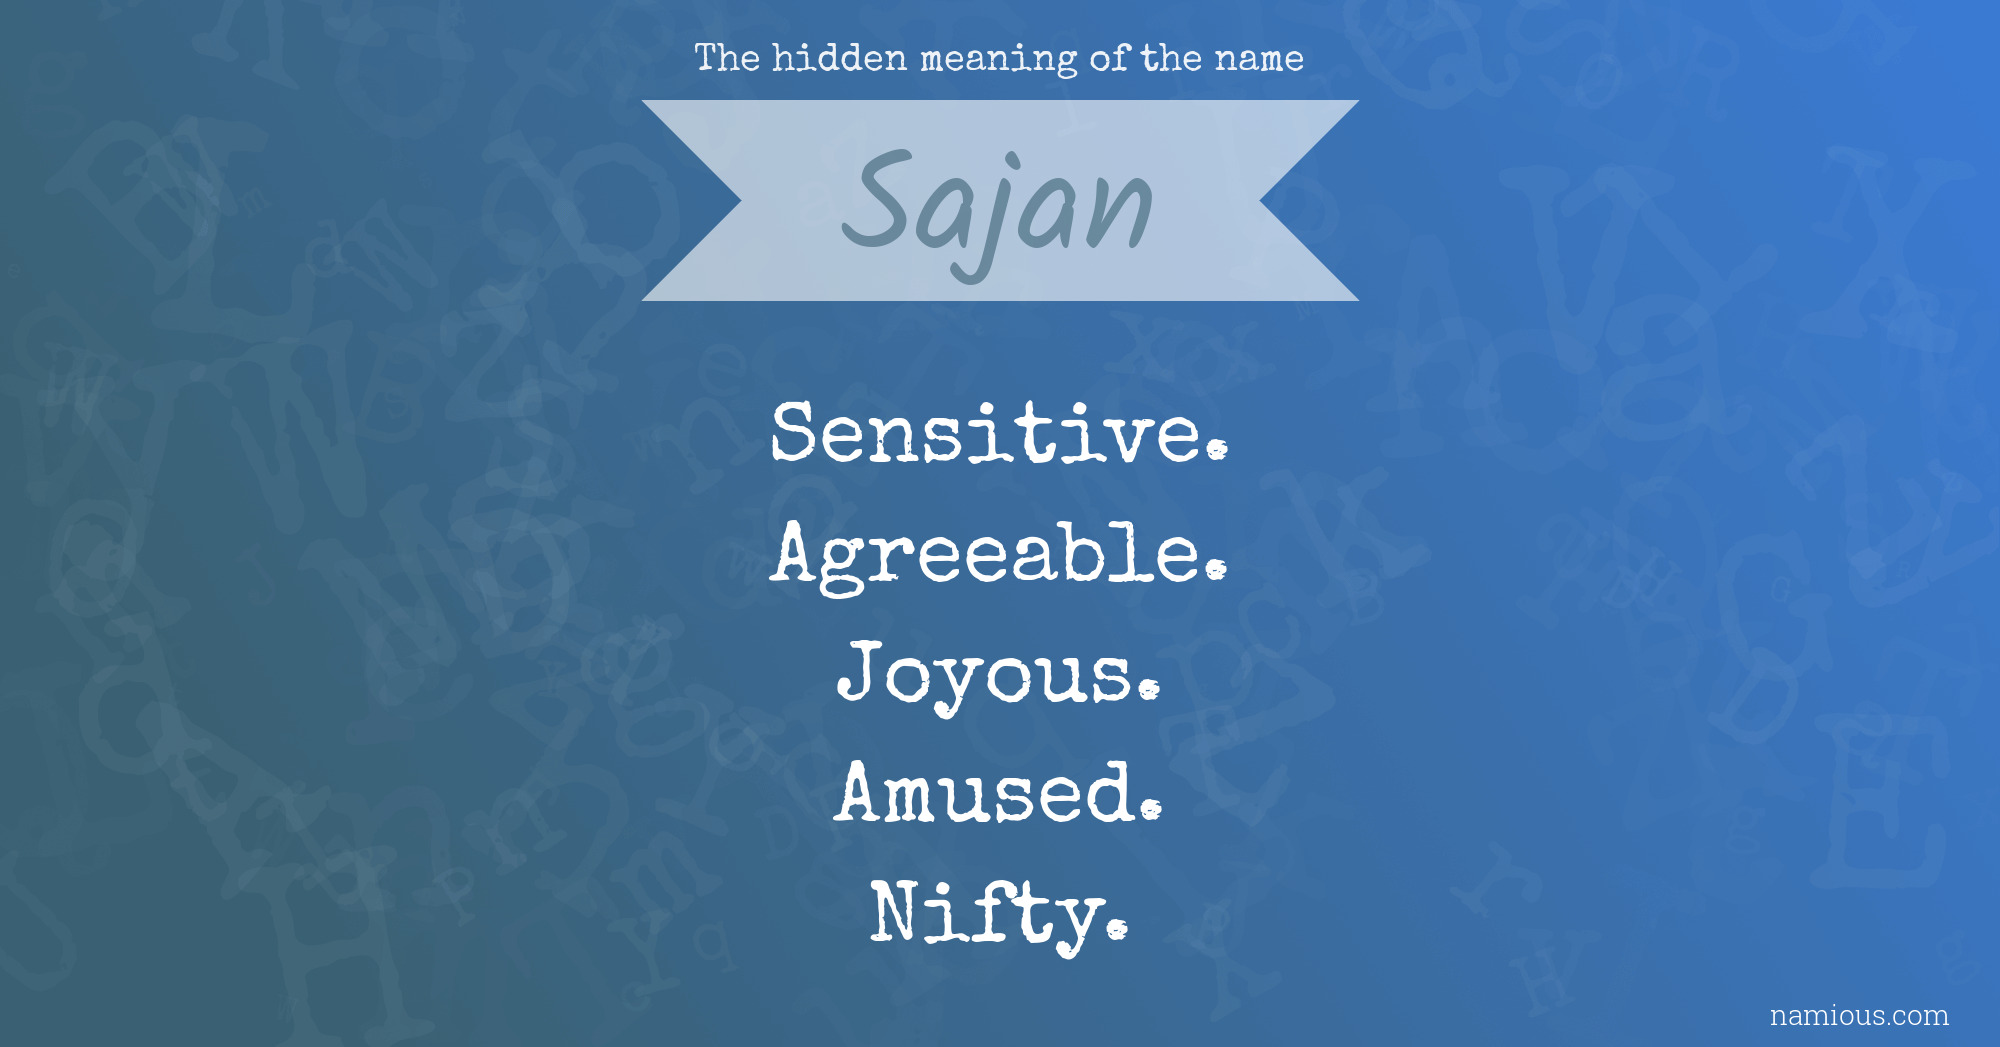 The hidden meaning of the name Sajan